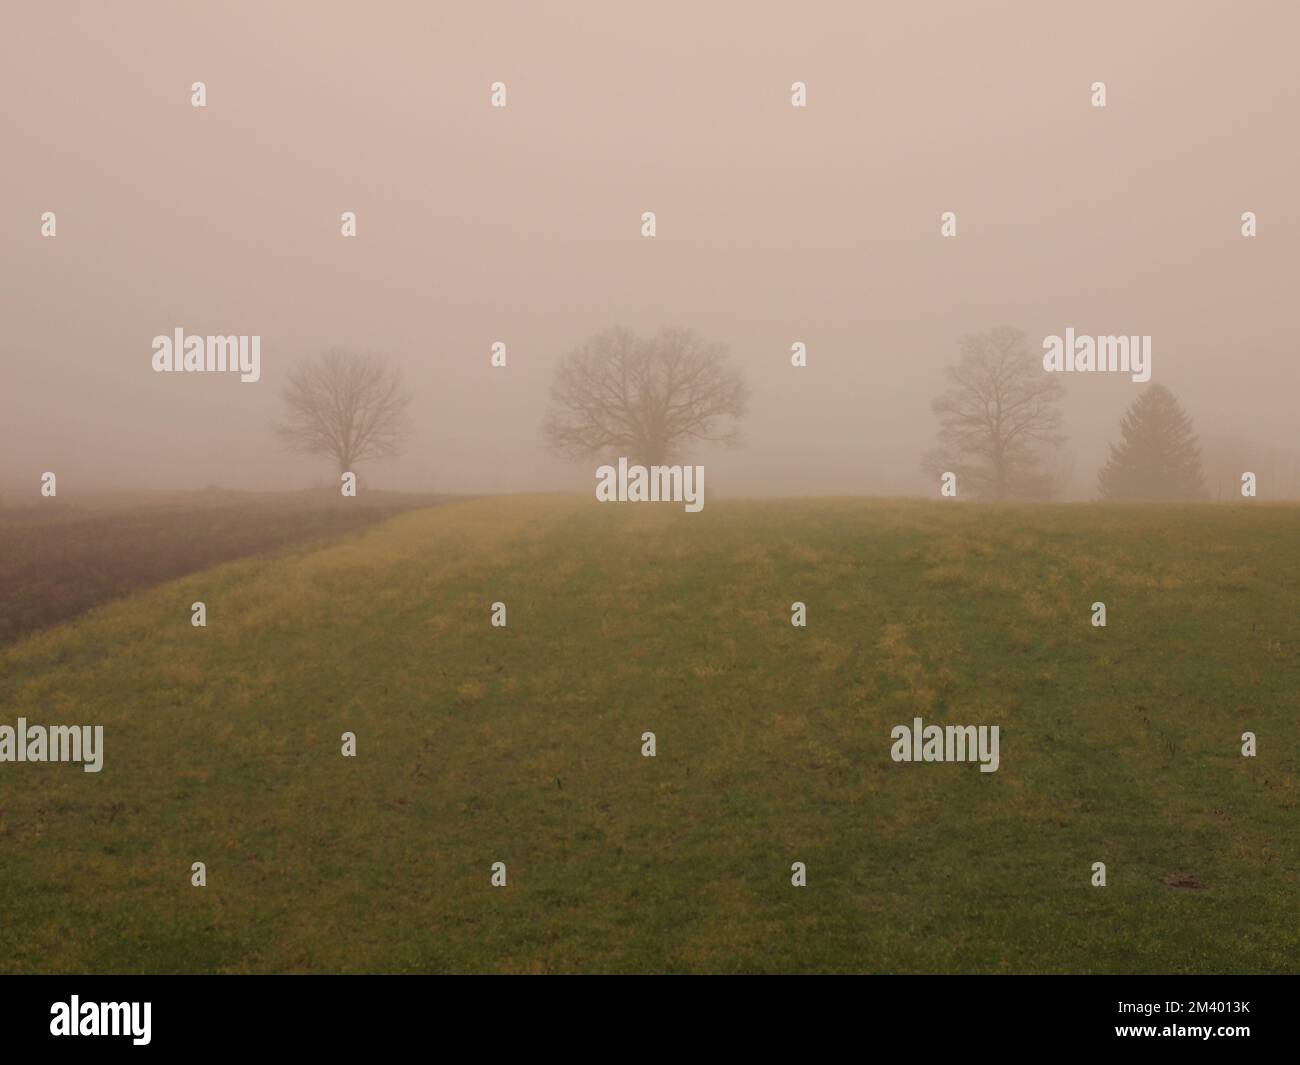 Dense fog covering four distant trees in a field in Newton, New Jersey. Stock Photo